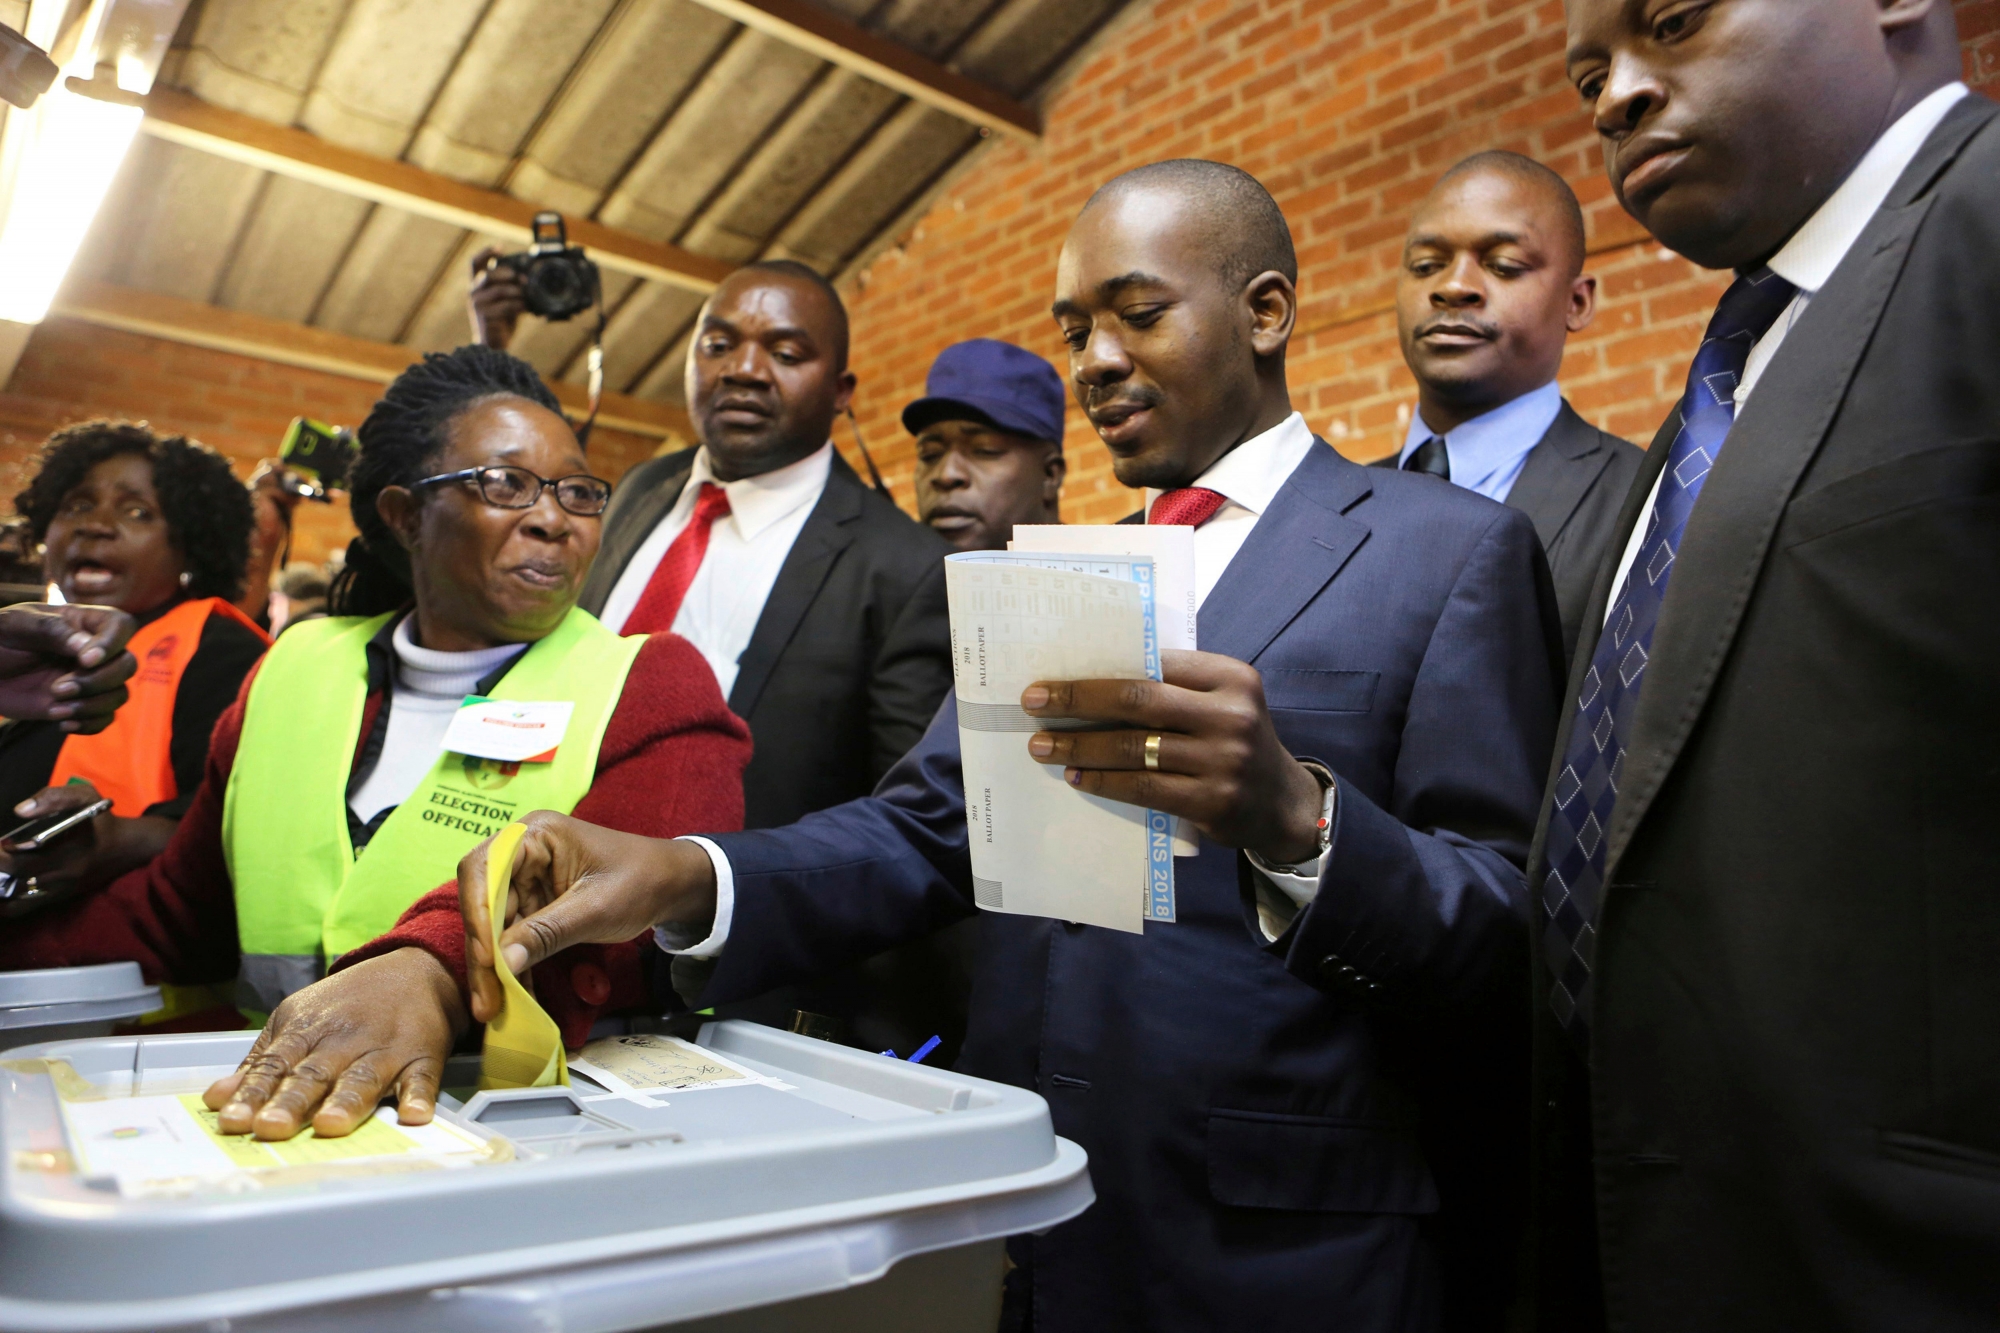 Zimbabwe's main opposition leader Nelson Chamisa casts his vote at a polling station in Harare, Zimbabwe, Monday, July 30, 2018. Zimbabwe votes in an election that could, if deemed credible, tilt the country toward recovery after years of economic collapse and repression under former leader Robert Mugabe. (AP Photo/Tsvangirayi Mukwazhi) Zimbabwe Elections Photo Gallery